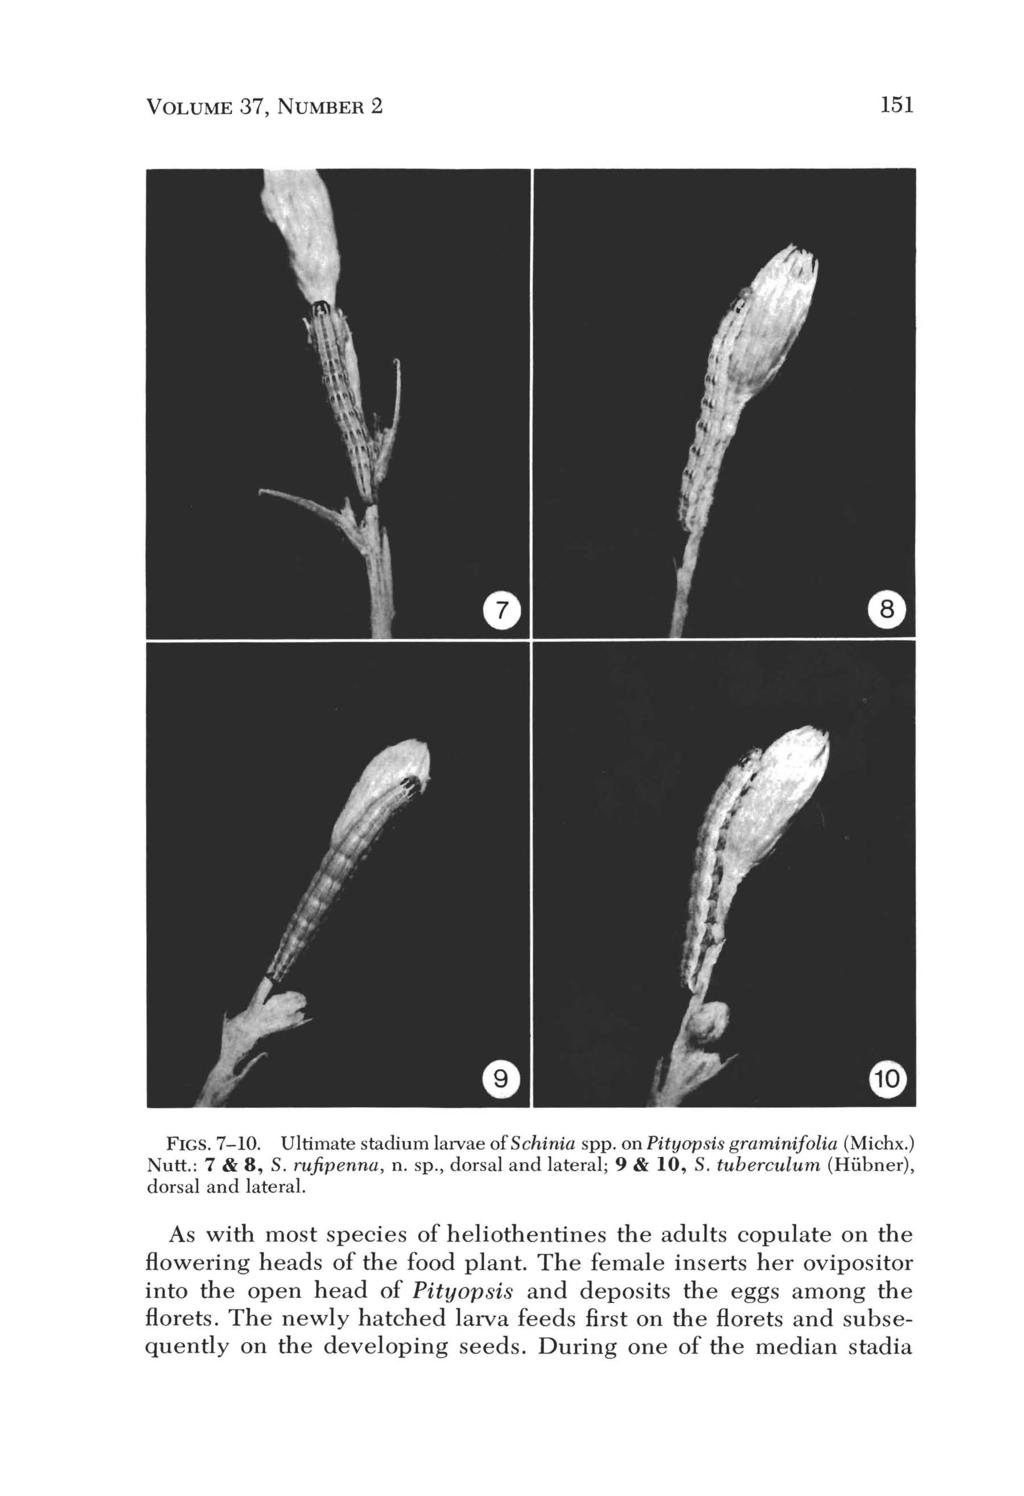 VOLUME 37, NUMBER 2 151 FIGS. 7-10. Ultimate stadium larvae ofschinia spp. on Pityopsis graminifolia (Michx.) Nutt.: 7 & 8, S. rujipenna, n. sp., dorsal and lateral; 9 & 10, S.